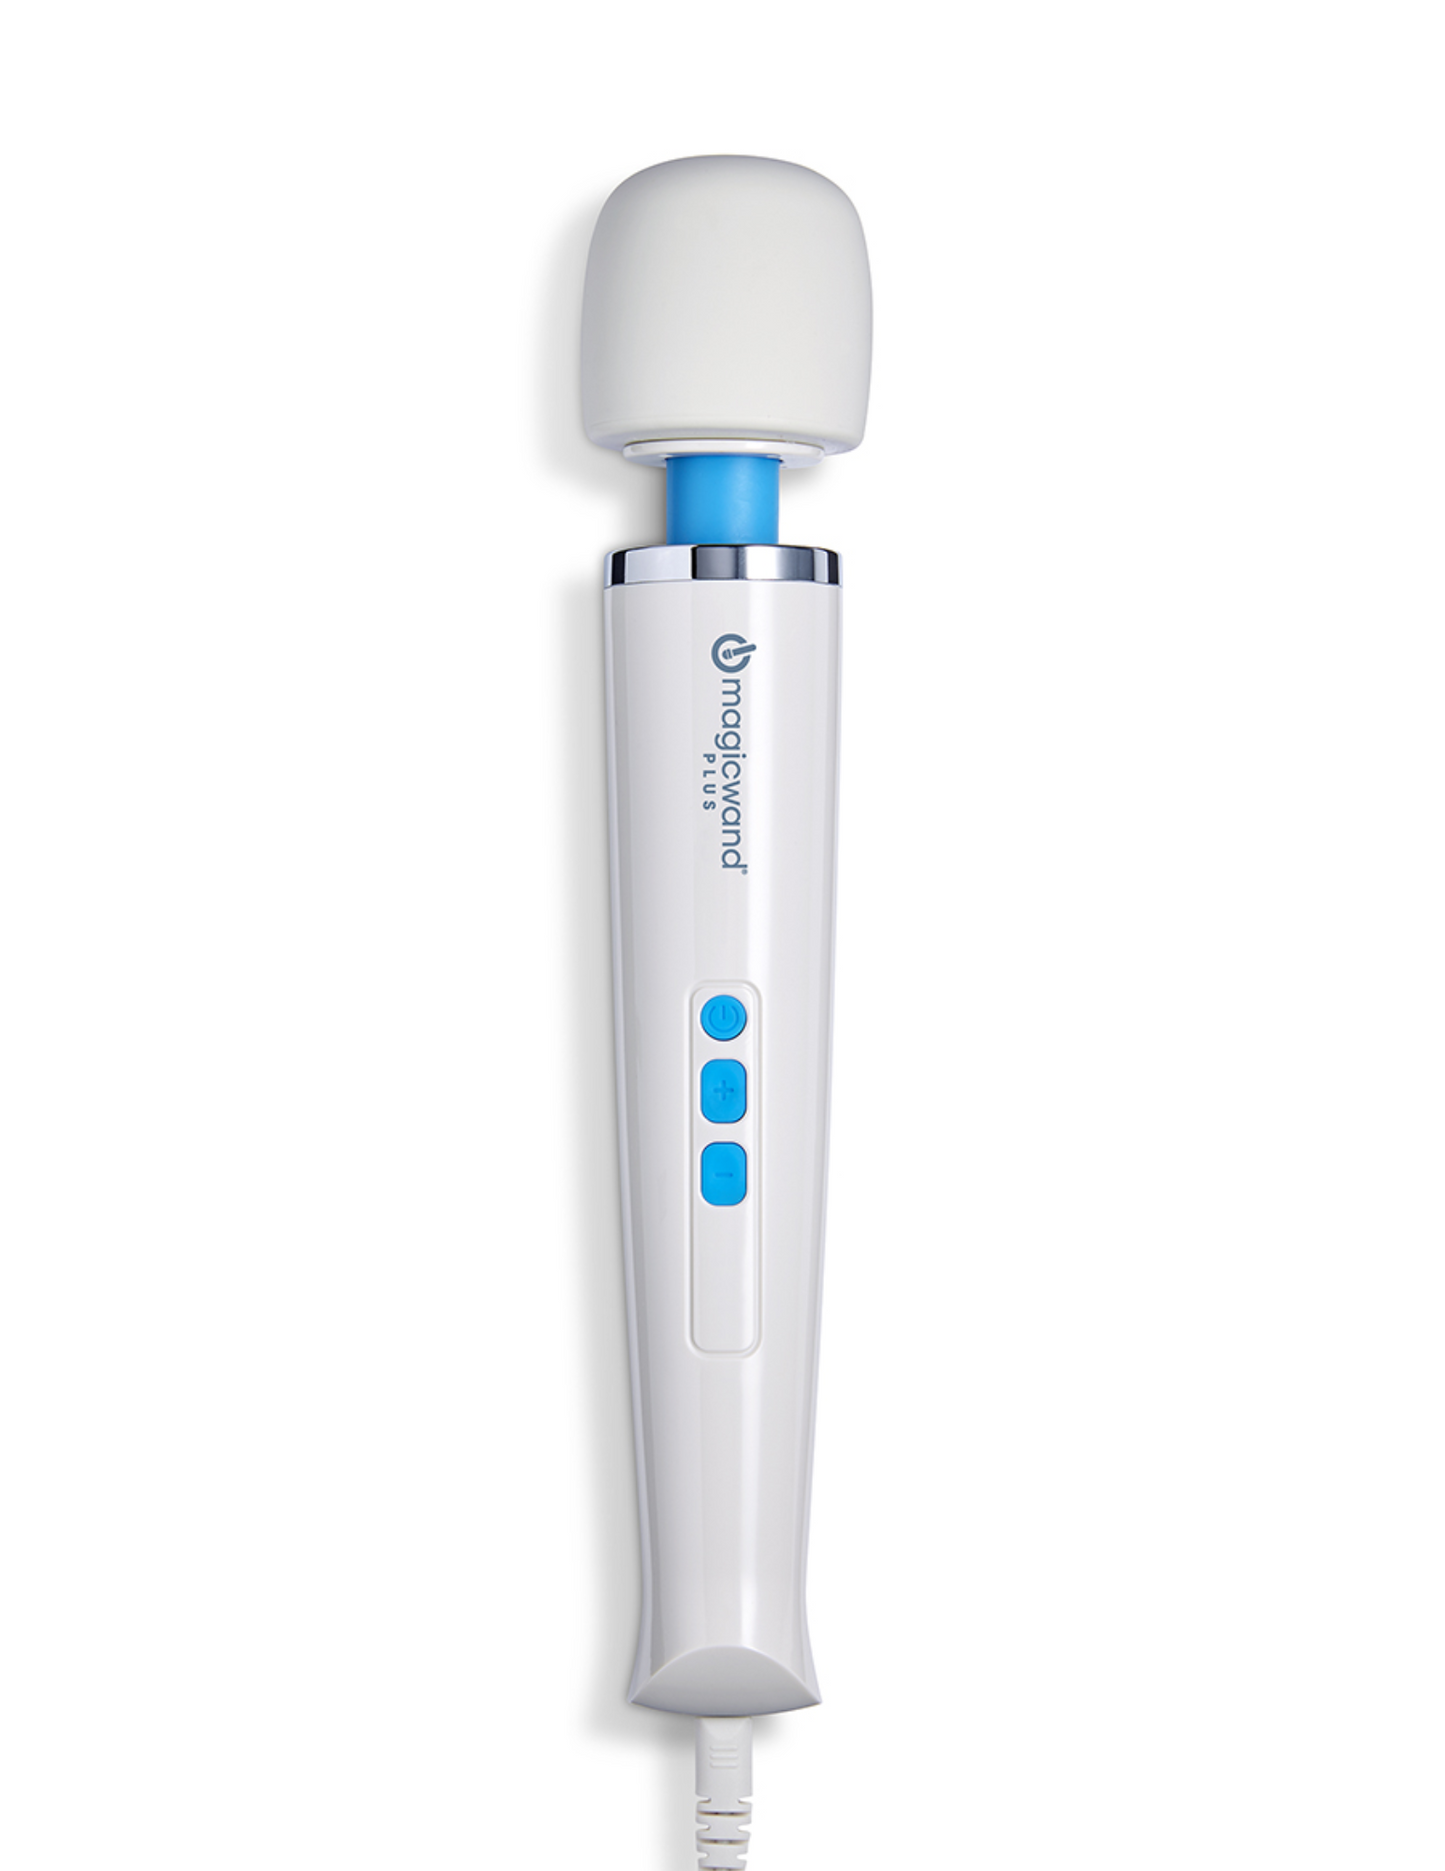 Top view of the corded Hitachi Magic Wand Plus.